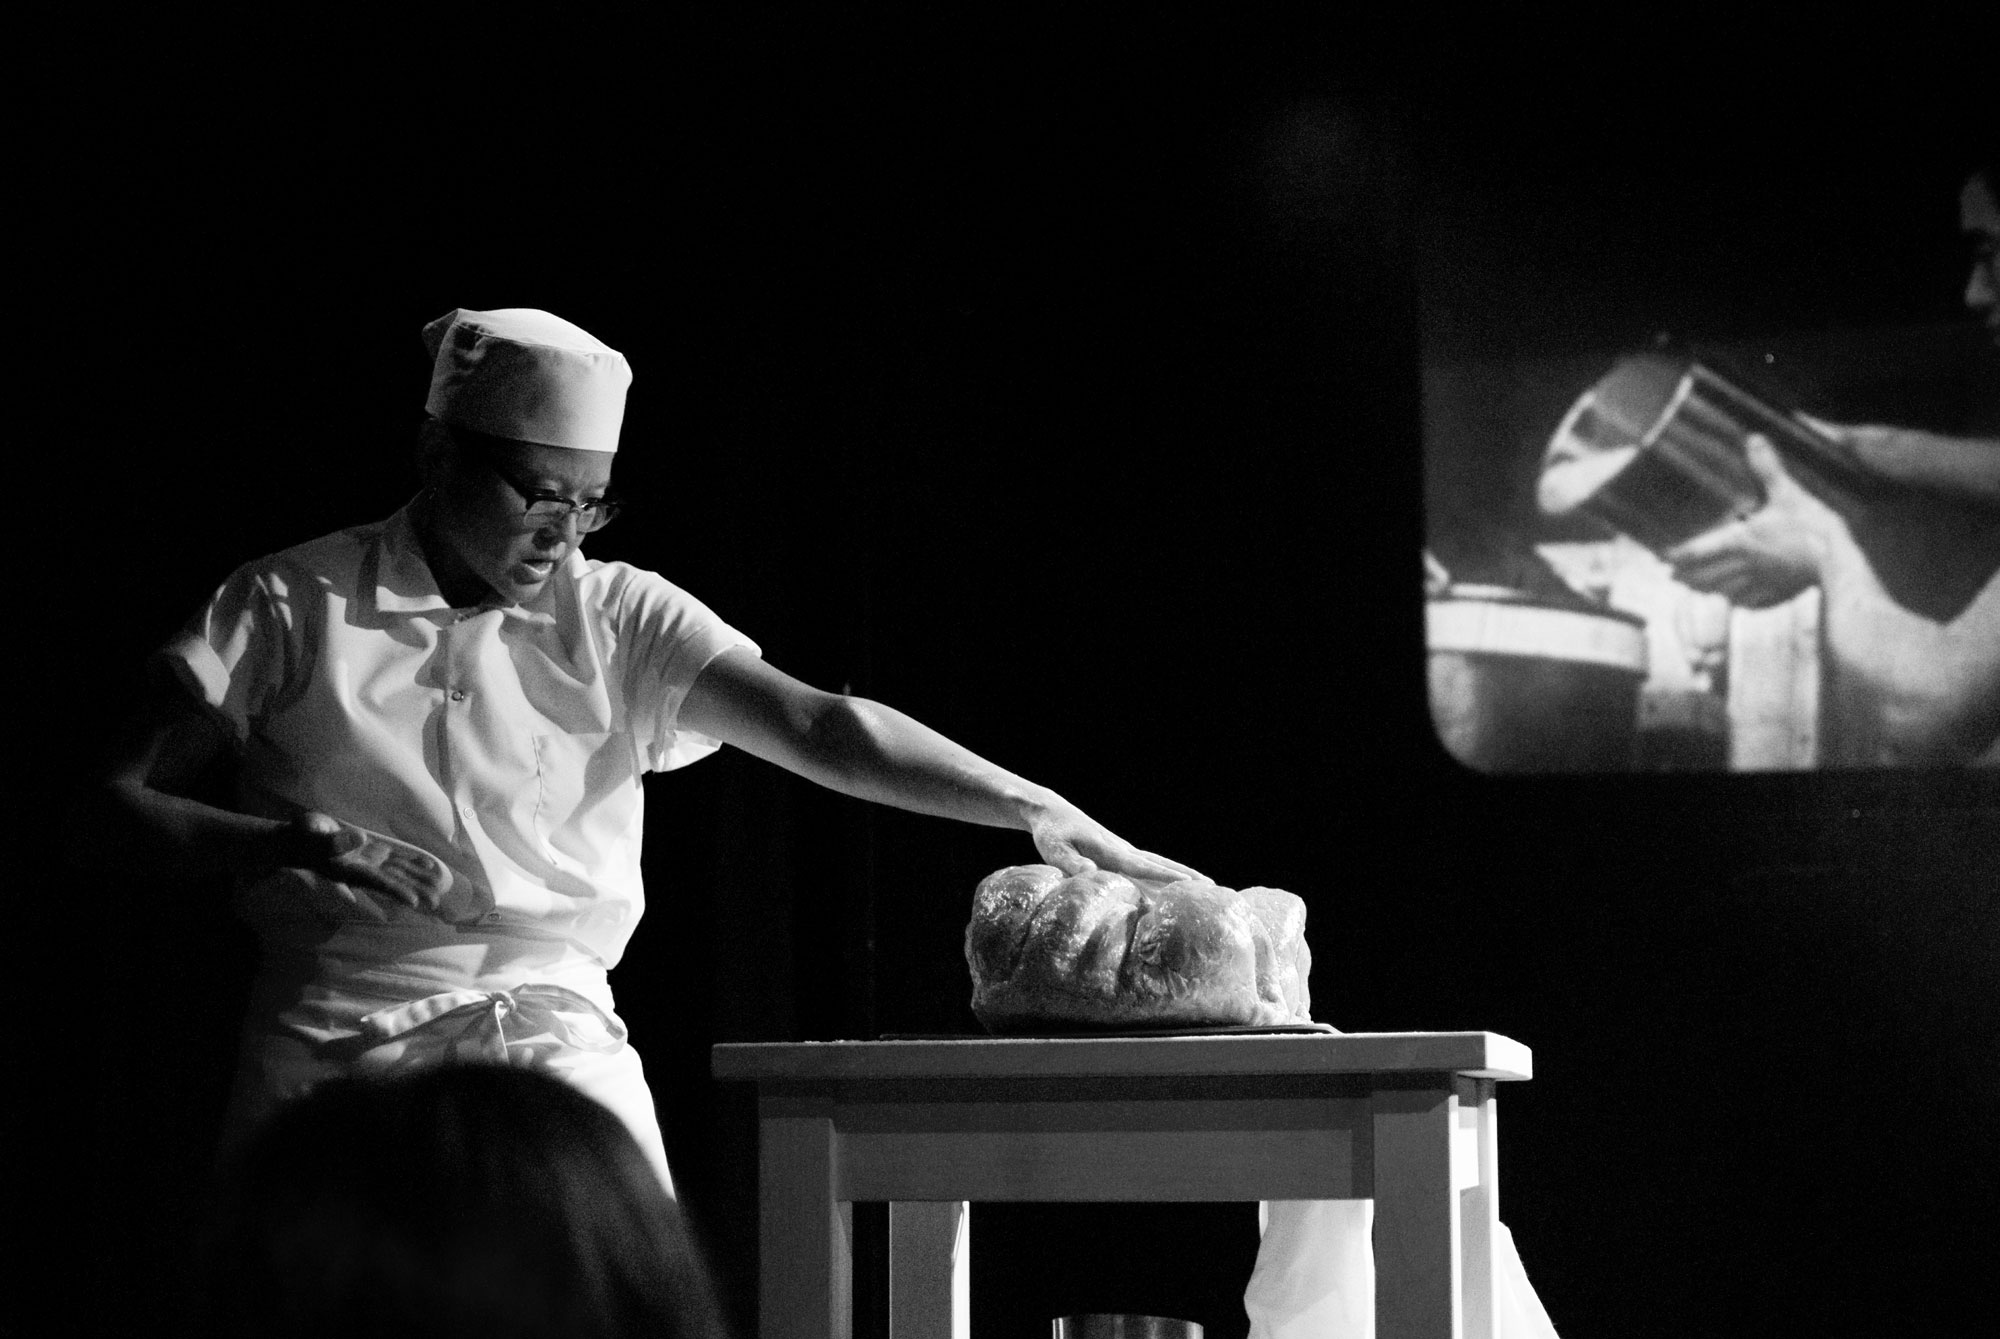 Black and white image of person dressed as baker interacting with a loaf of bread, projection behind